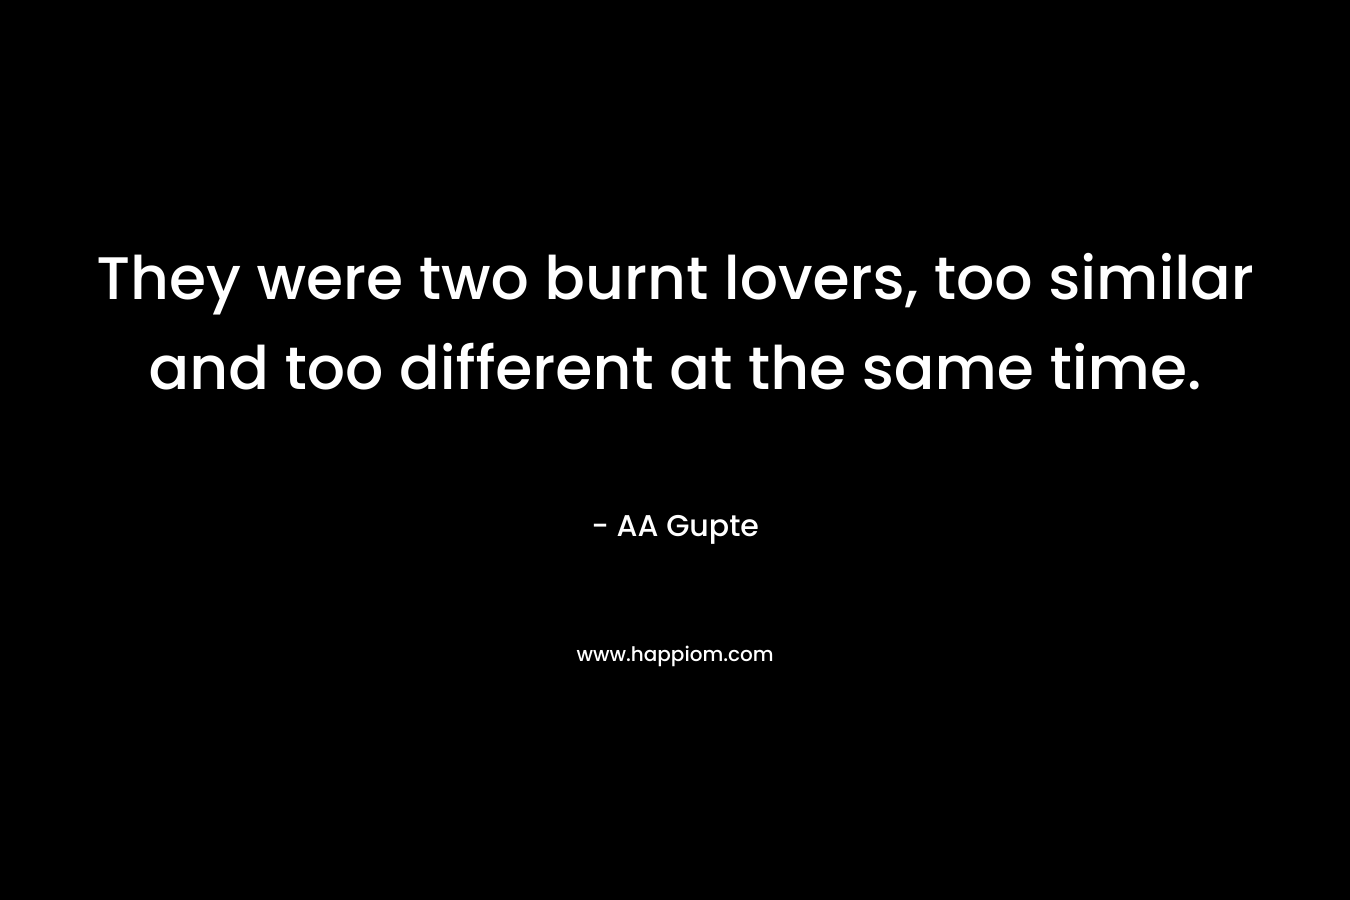 They were two burnt lovers, too similar and too different at the same time. – AA Gupte